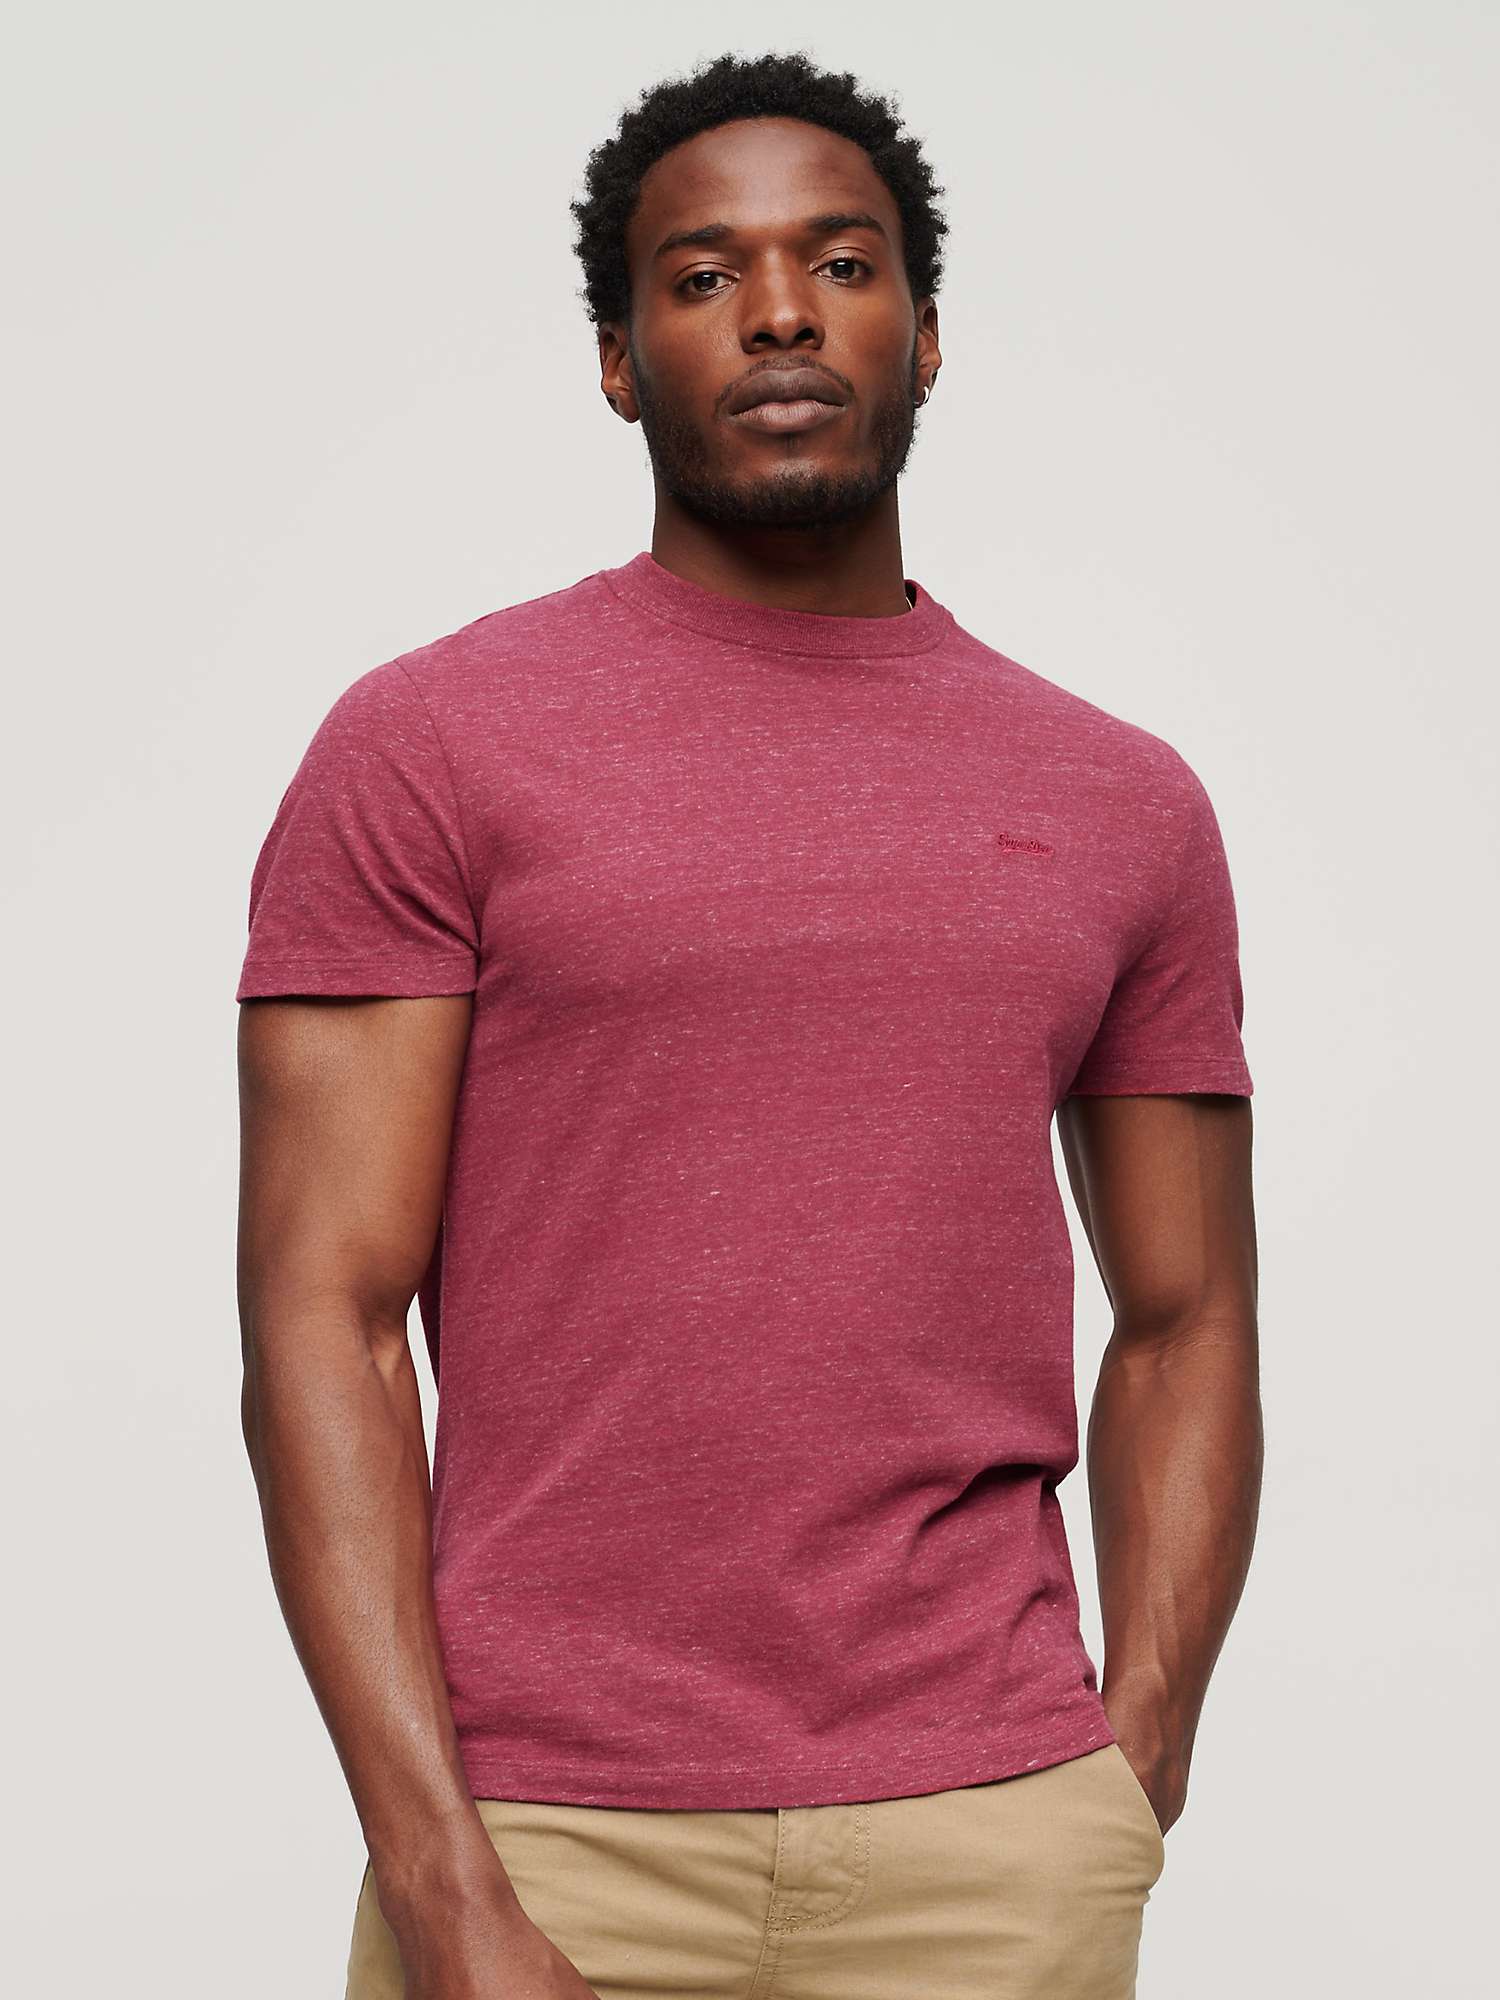 Buy Superdry Organic Cotton Essential Small Logo T-Shirt Online at johnlewis.com